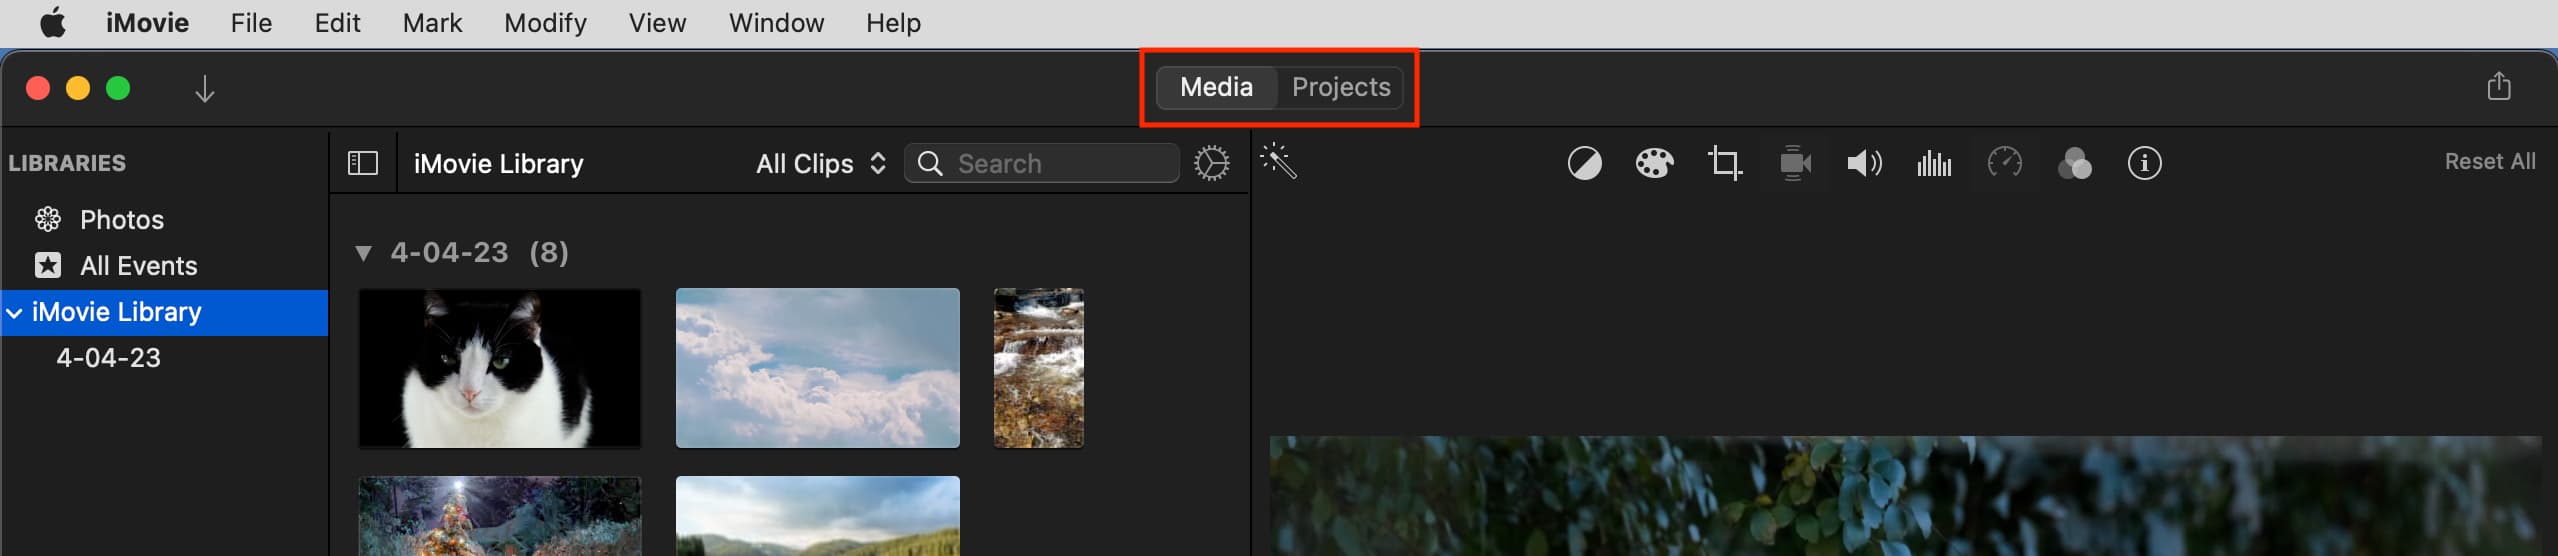 Select Media or Projects in iMovie on Mac